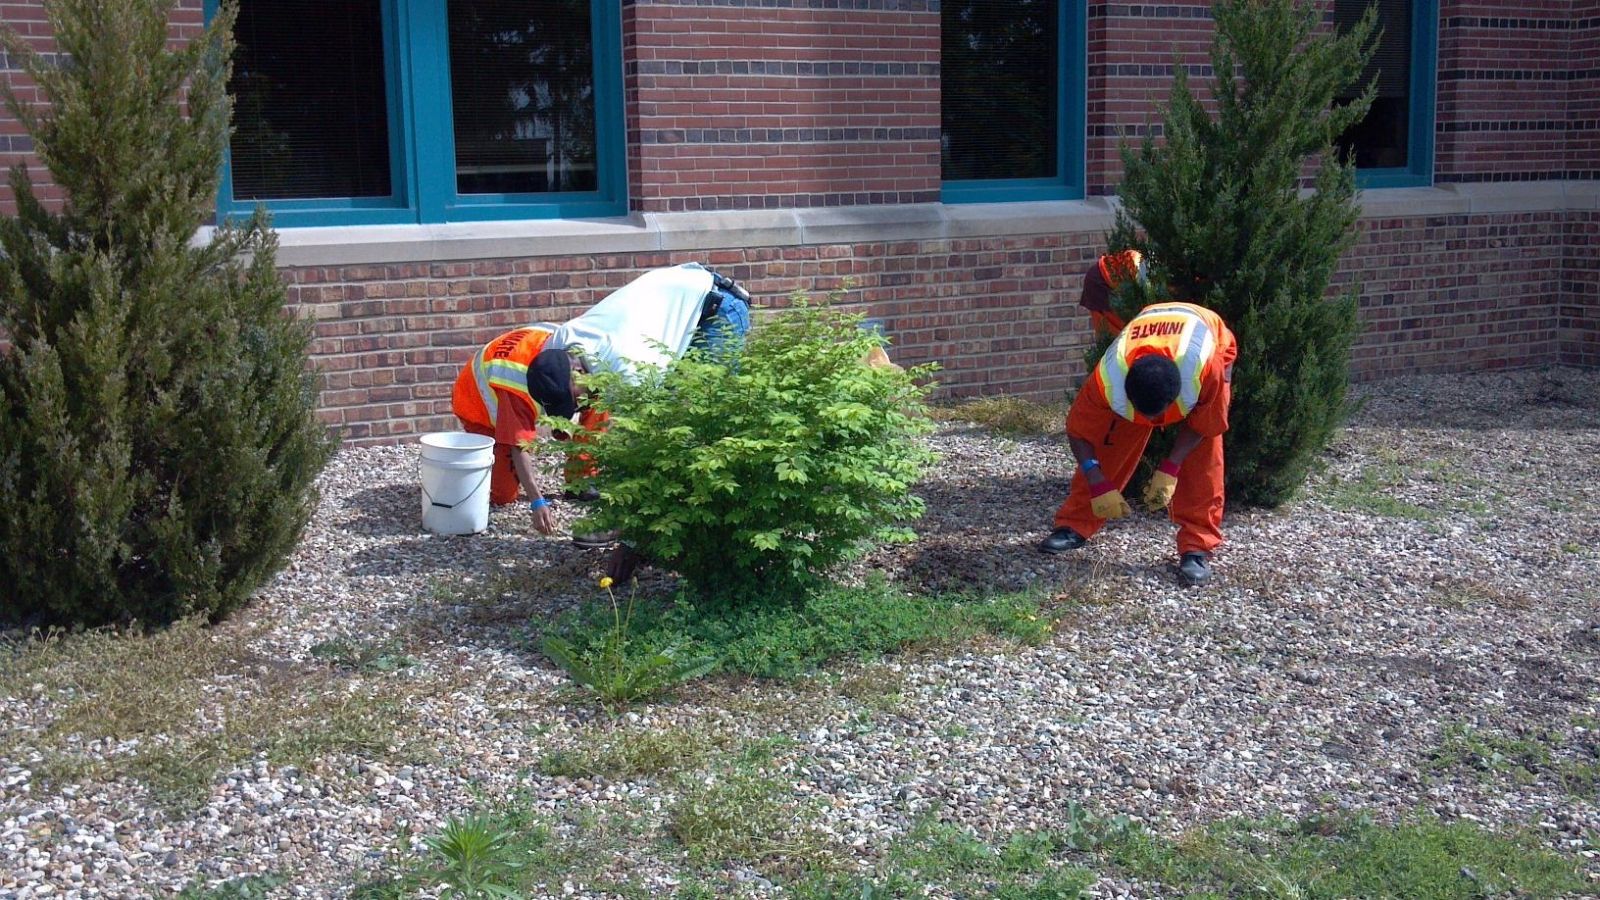 Inmates working together to clean up weeds outside